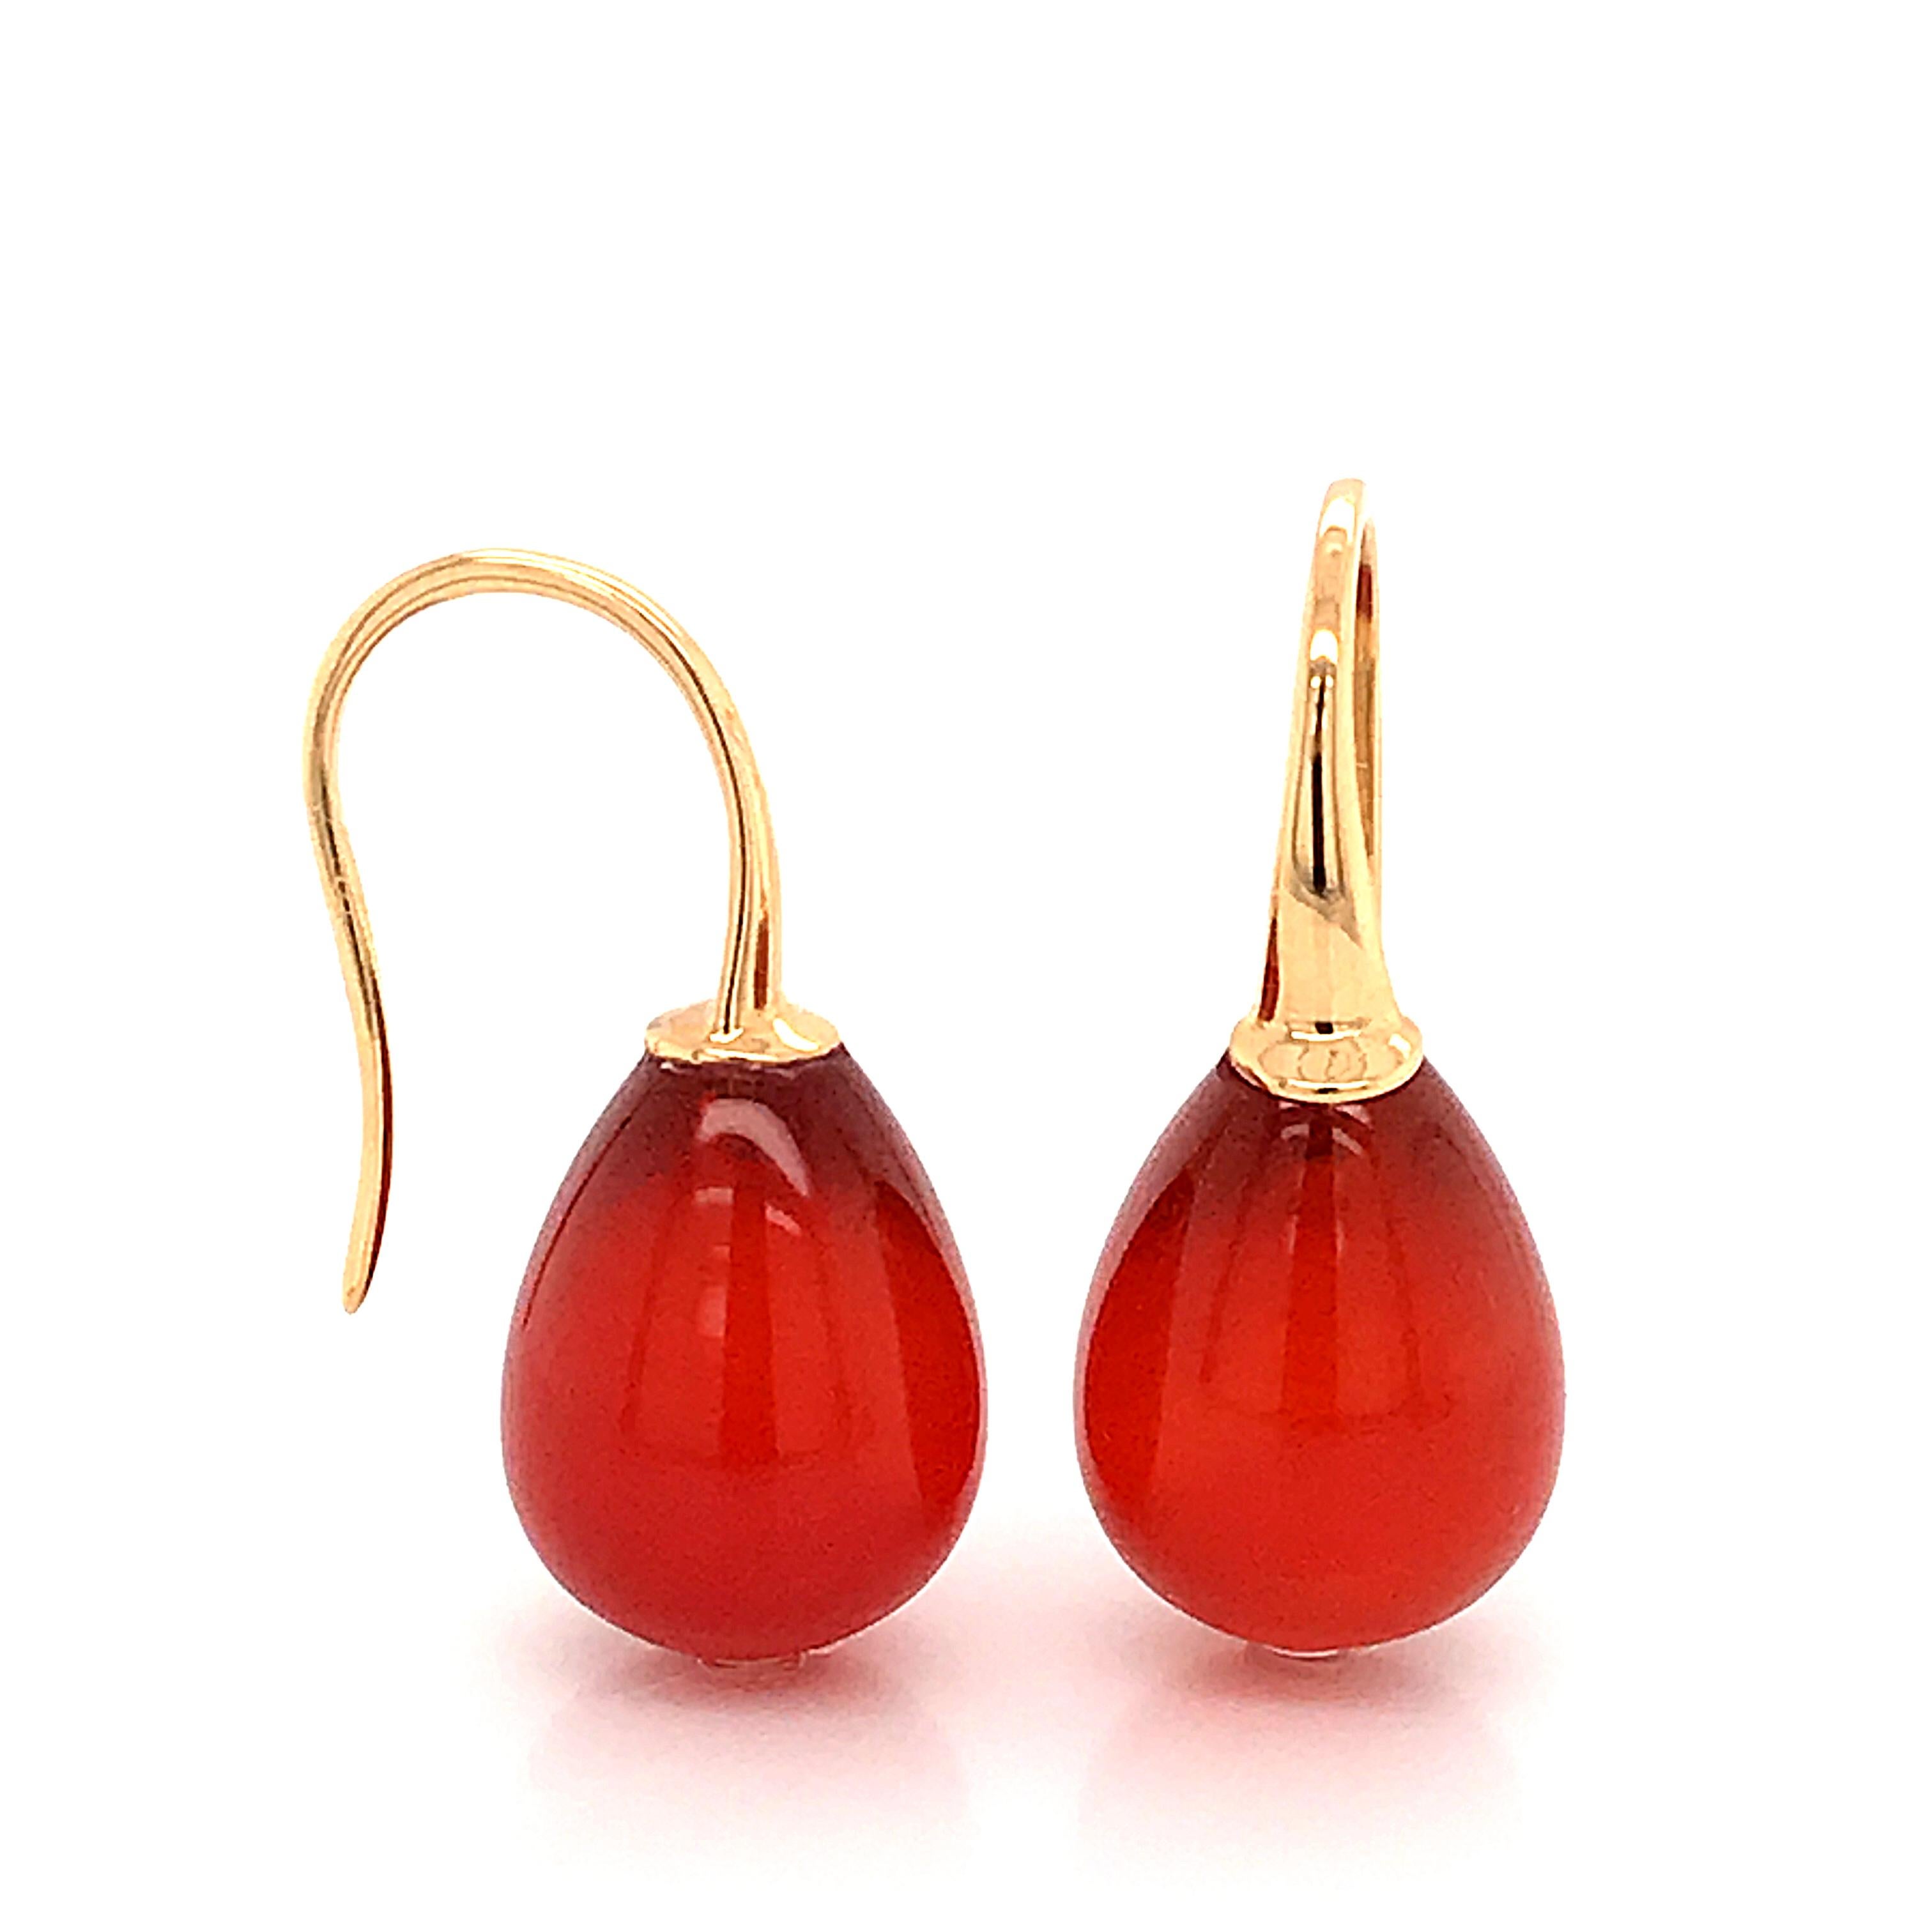 Oval Cut Red Agathe and Yellow Gold 18 Karat Drop Earrings